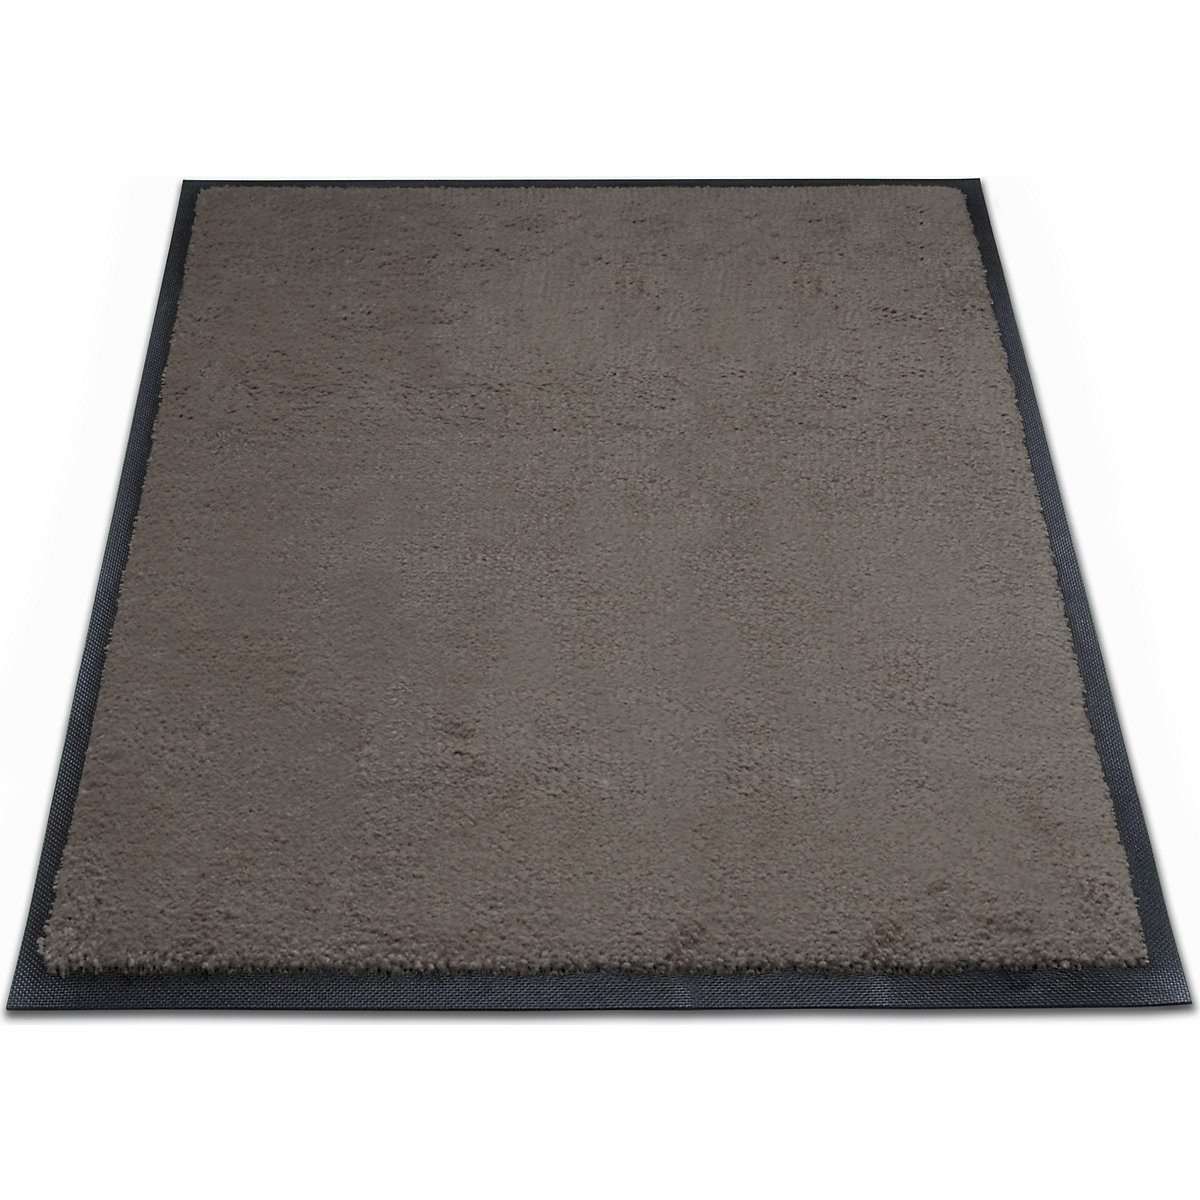 EAZYCARE STYLE entrance matting, LxW 850 x 750 mm, grey brown-3